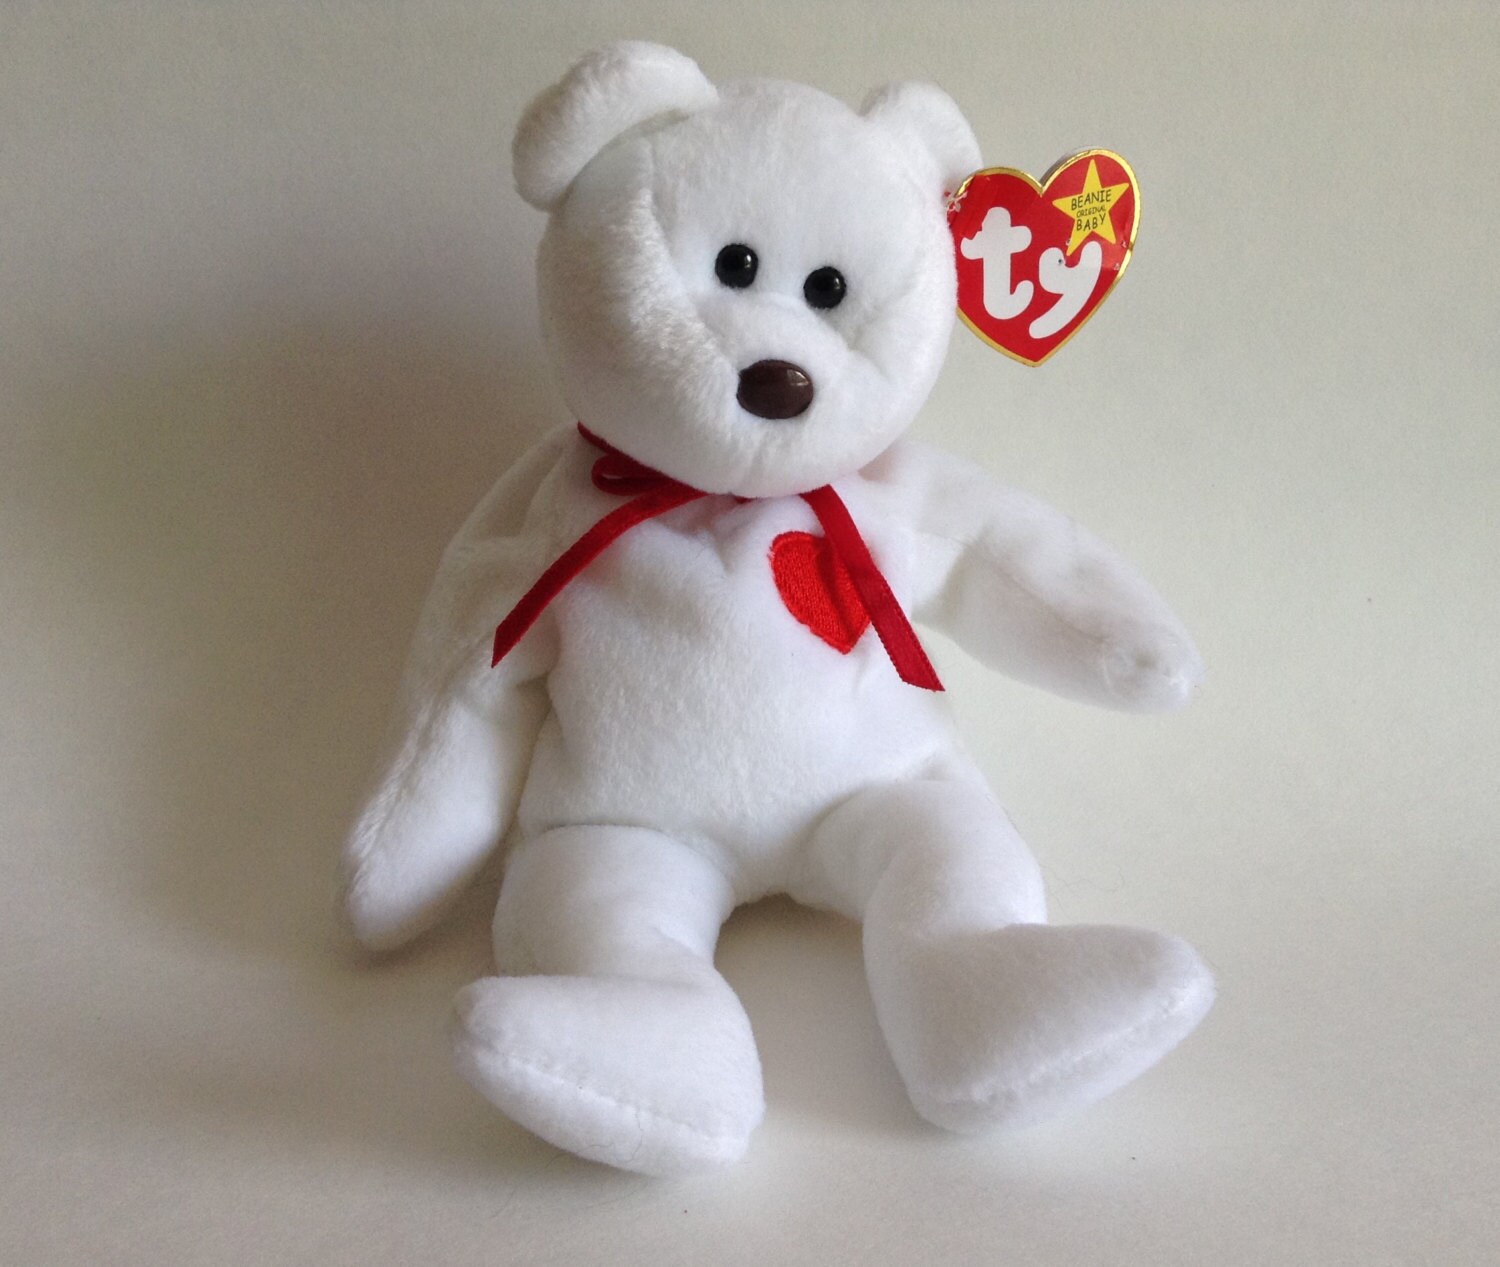 Beanie Baby Valention 1993 White Bear Brown by realsimpledeals